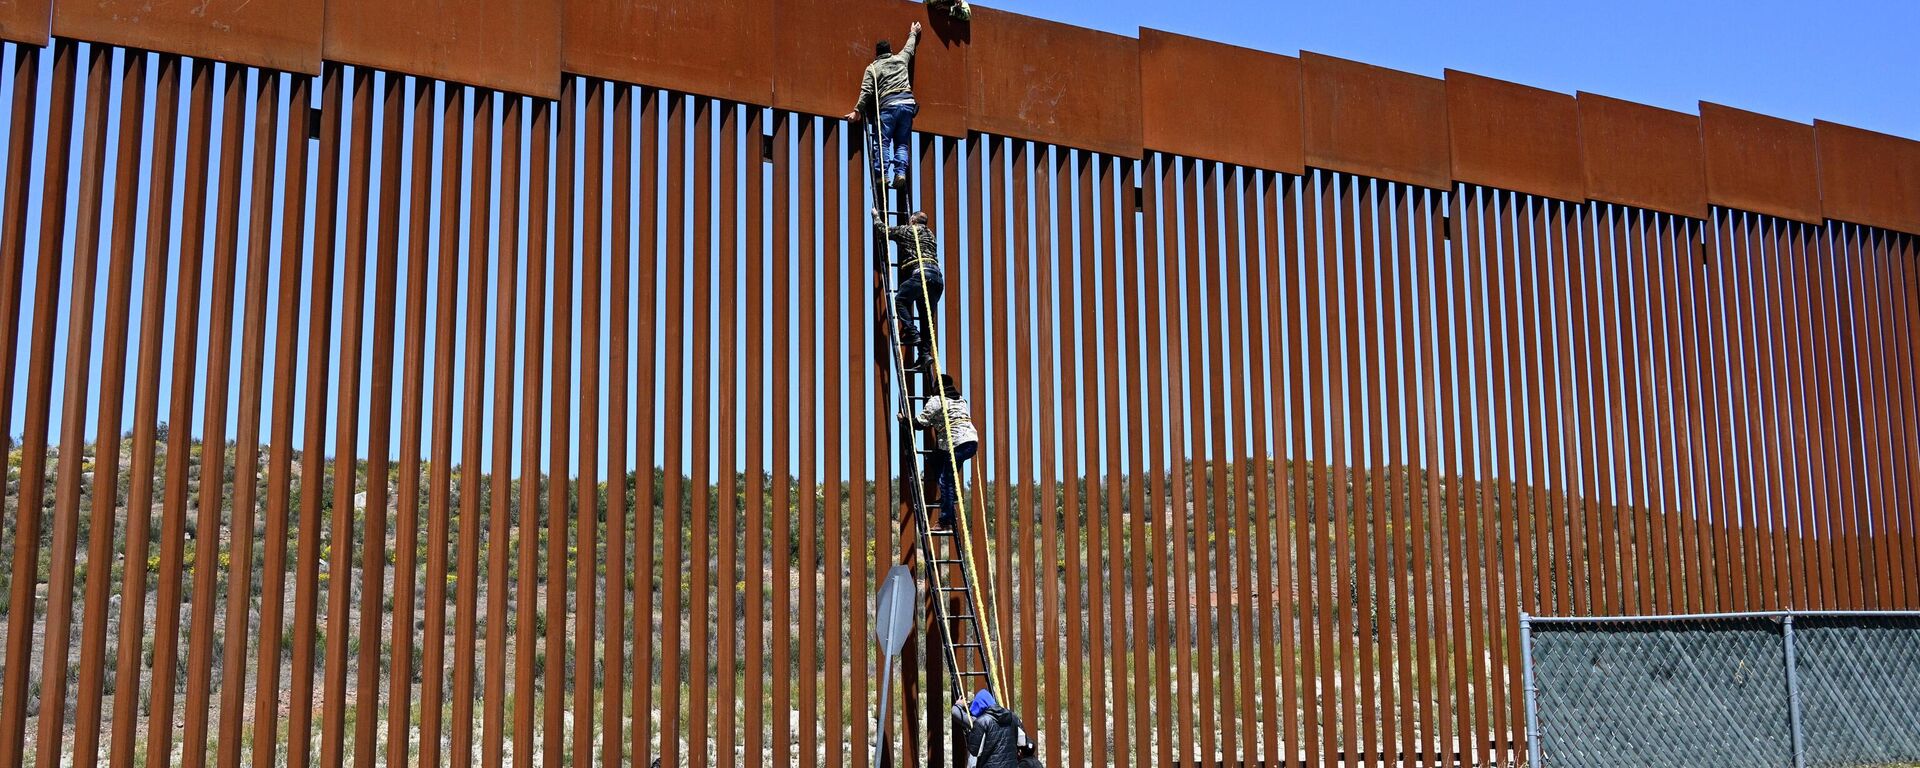 People use a ladder to scale the border fence at the US/Mexico border in Tecate, Mexico, Thursday, April 21, 2022. - Sputnik International, 1920, 15.09.2022